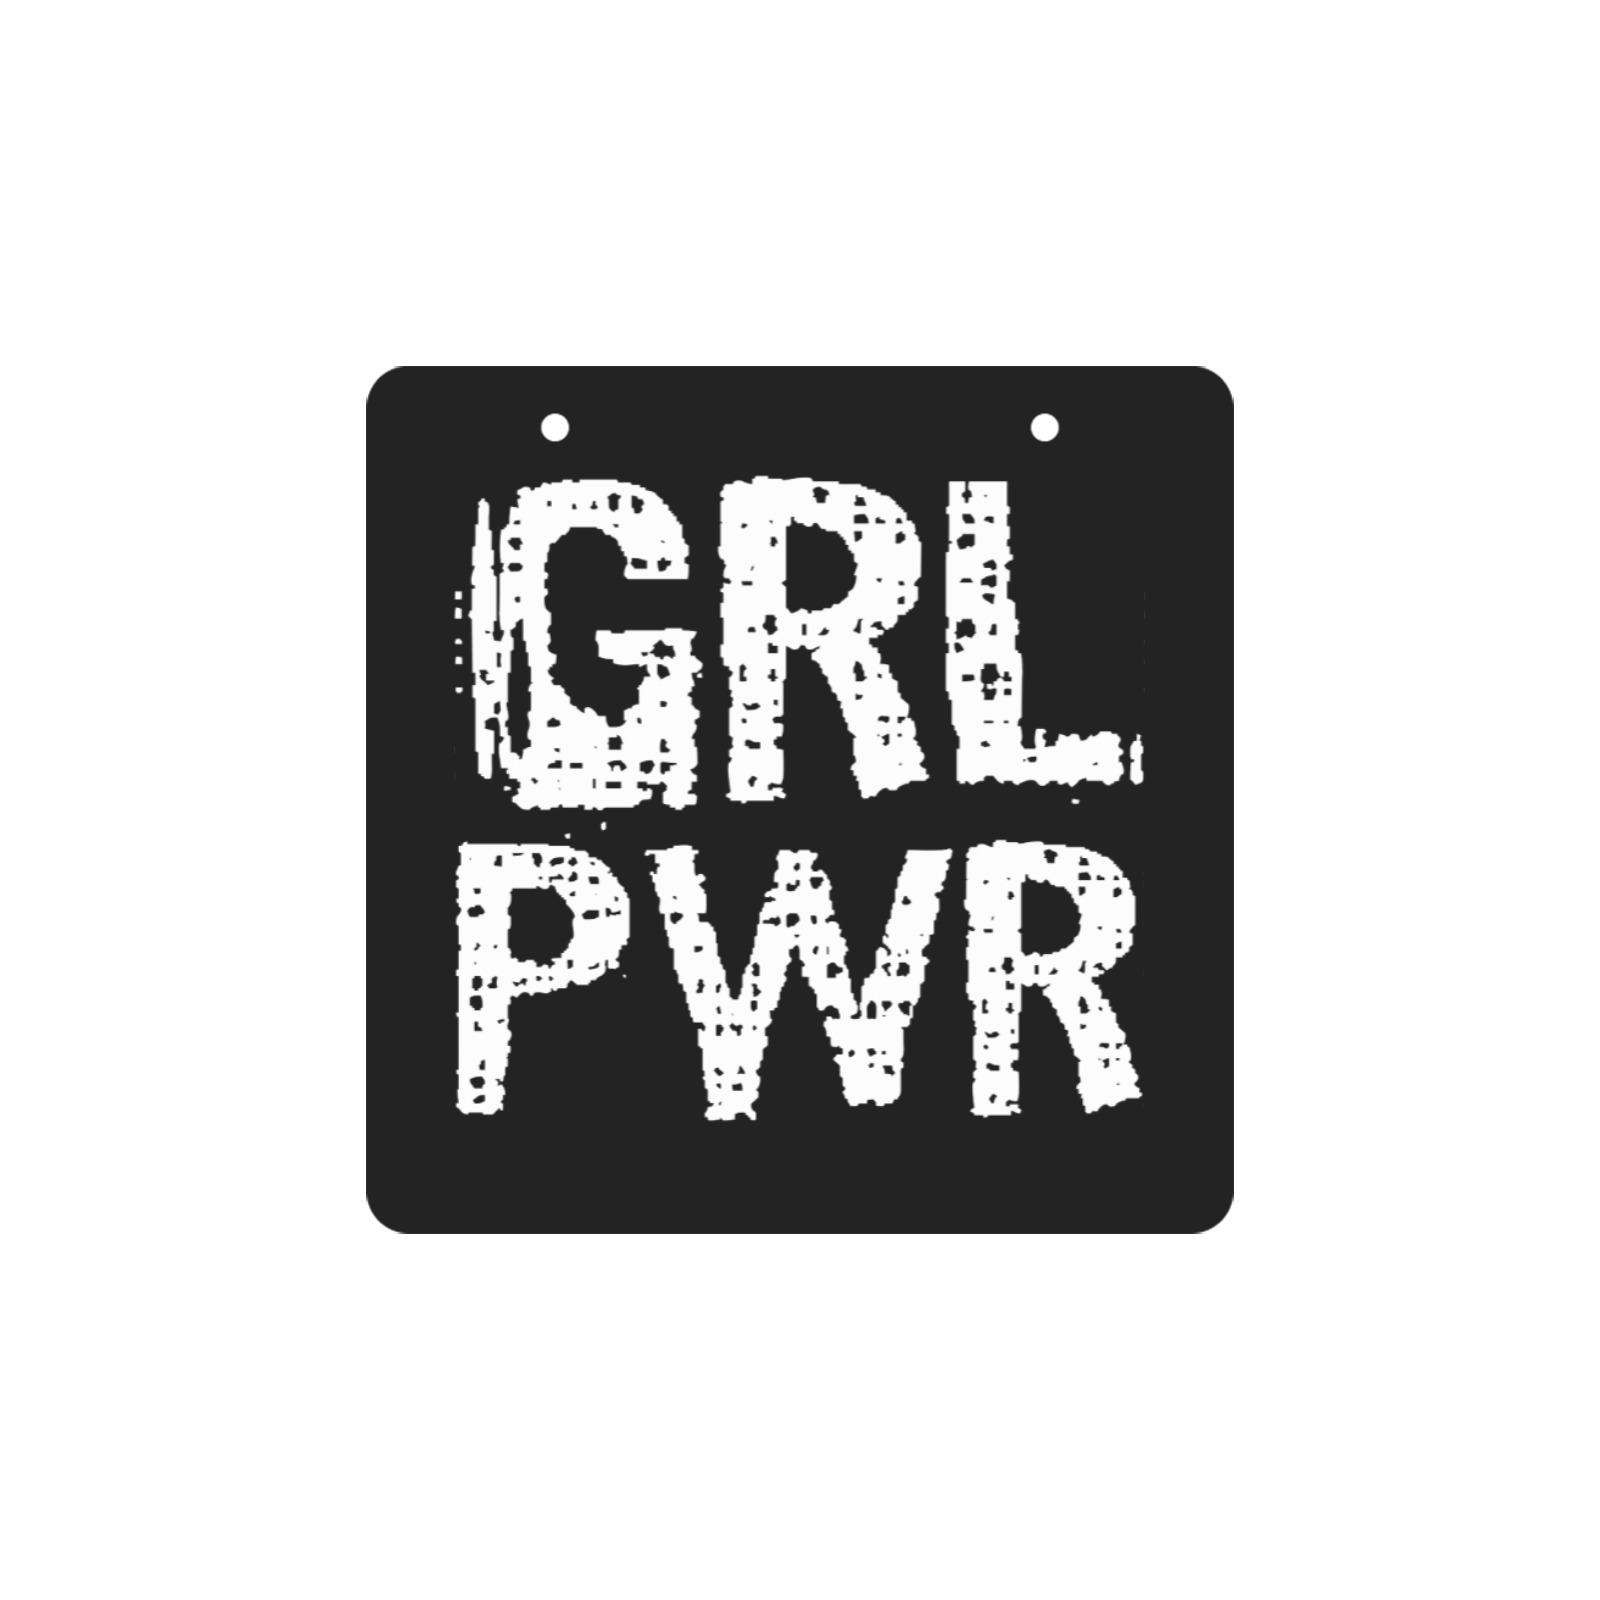 GRL PWR - Girl Power stunning white text. Square Wood Door Hanging Sign